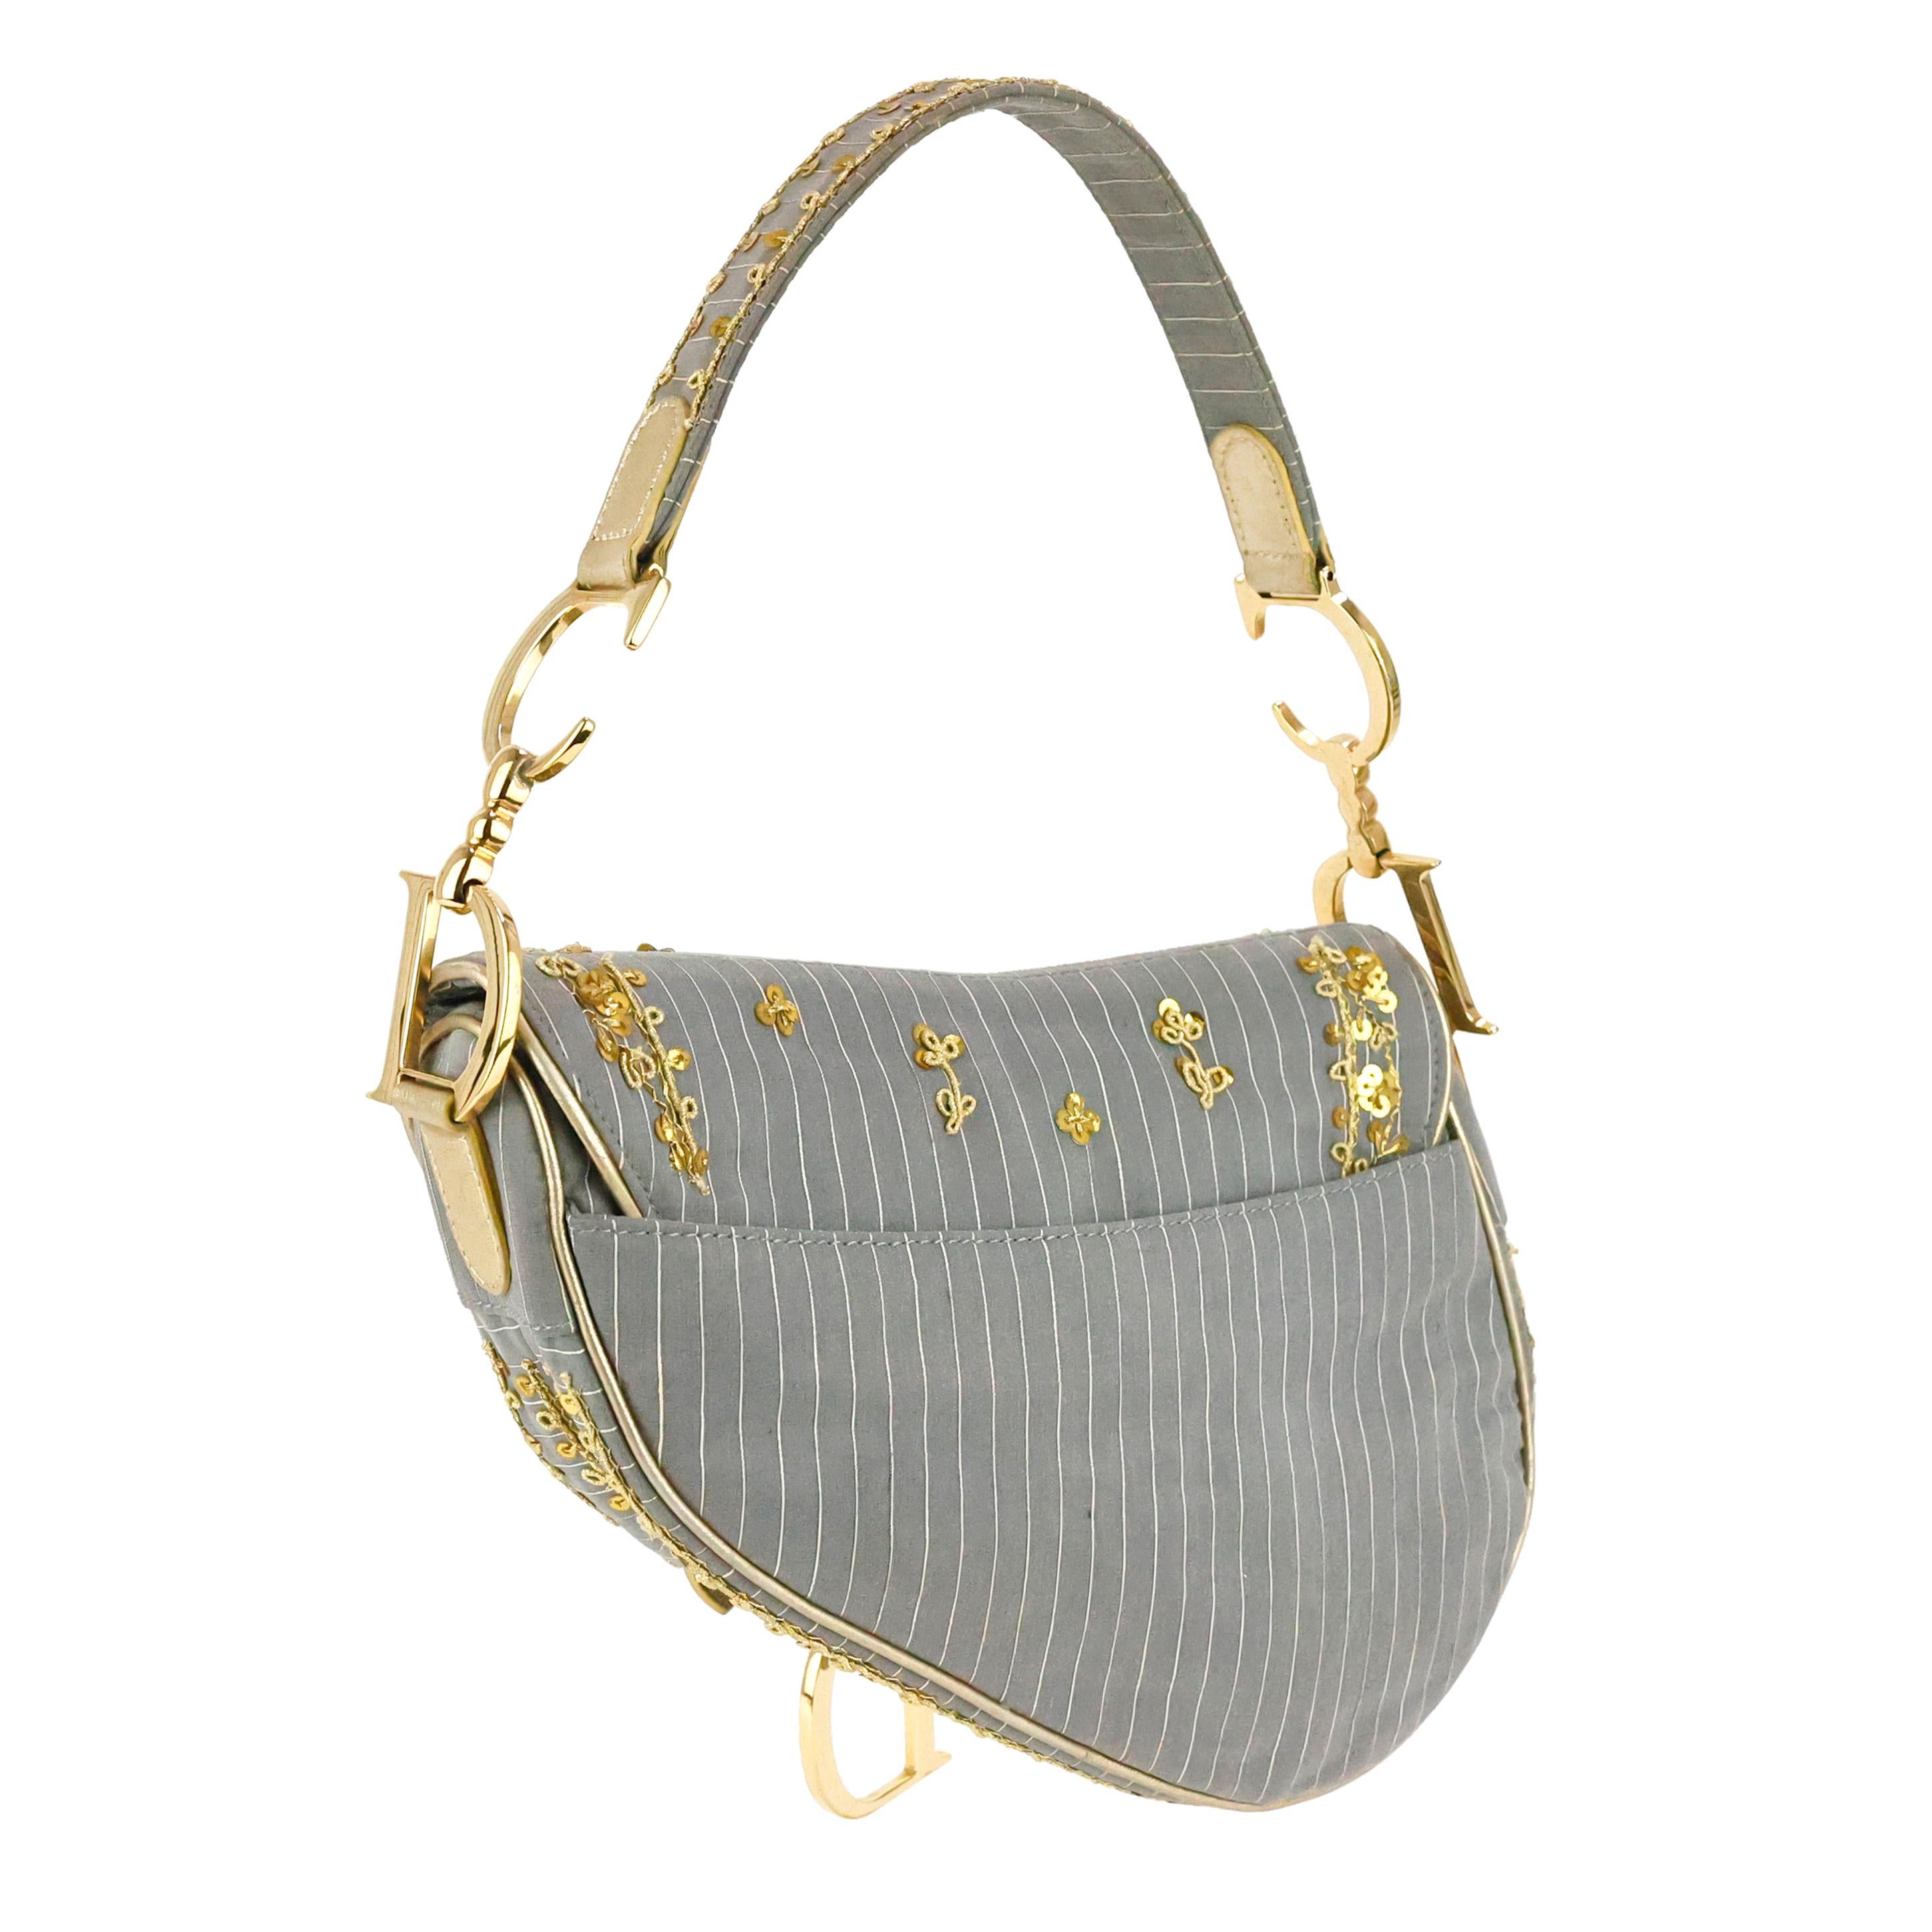 Dior Saddle bag - Limited Edition 0086 in grey sequins embellished fabric.

Condition:
Good.

Measurements:
25cm x 19cm x 6cm